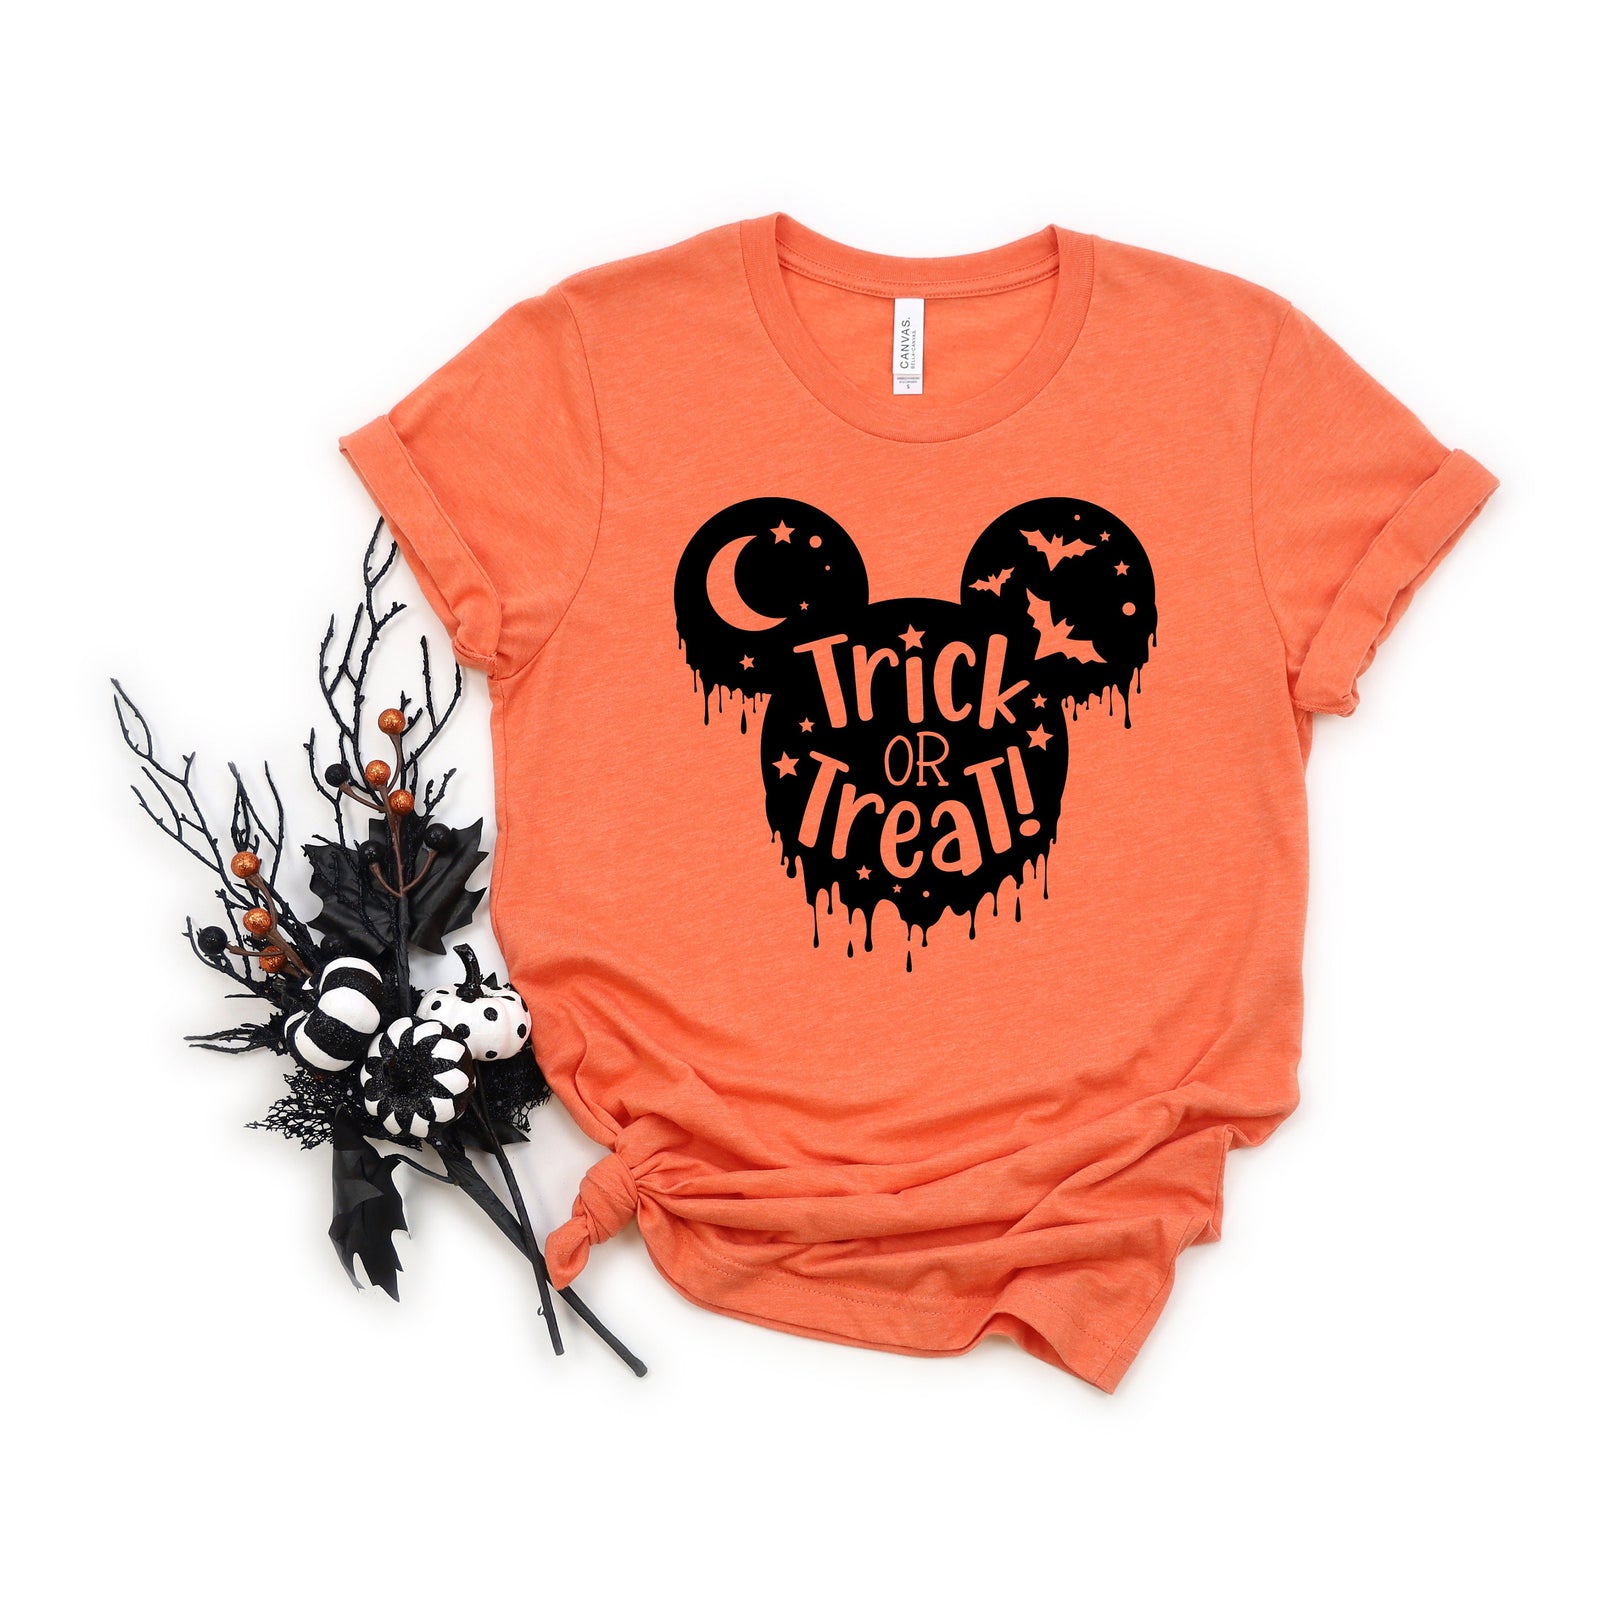 Mickey Mouse Trick or Treat - Adult T Shirt -Disney - Dripping Blood